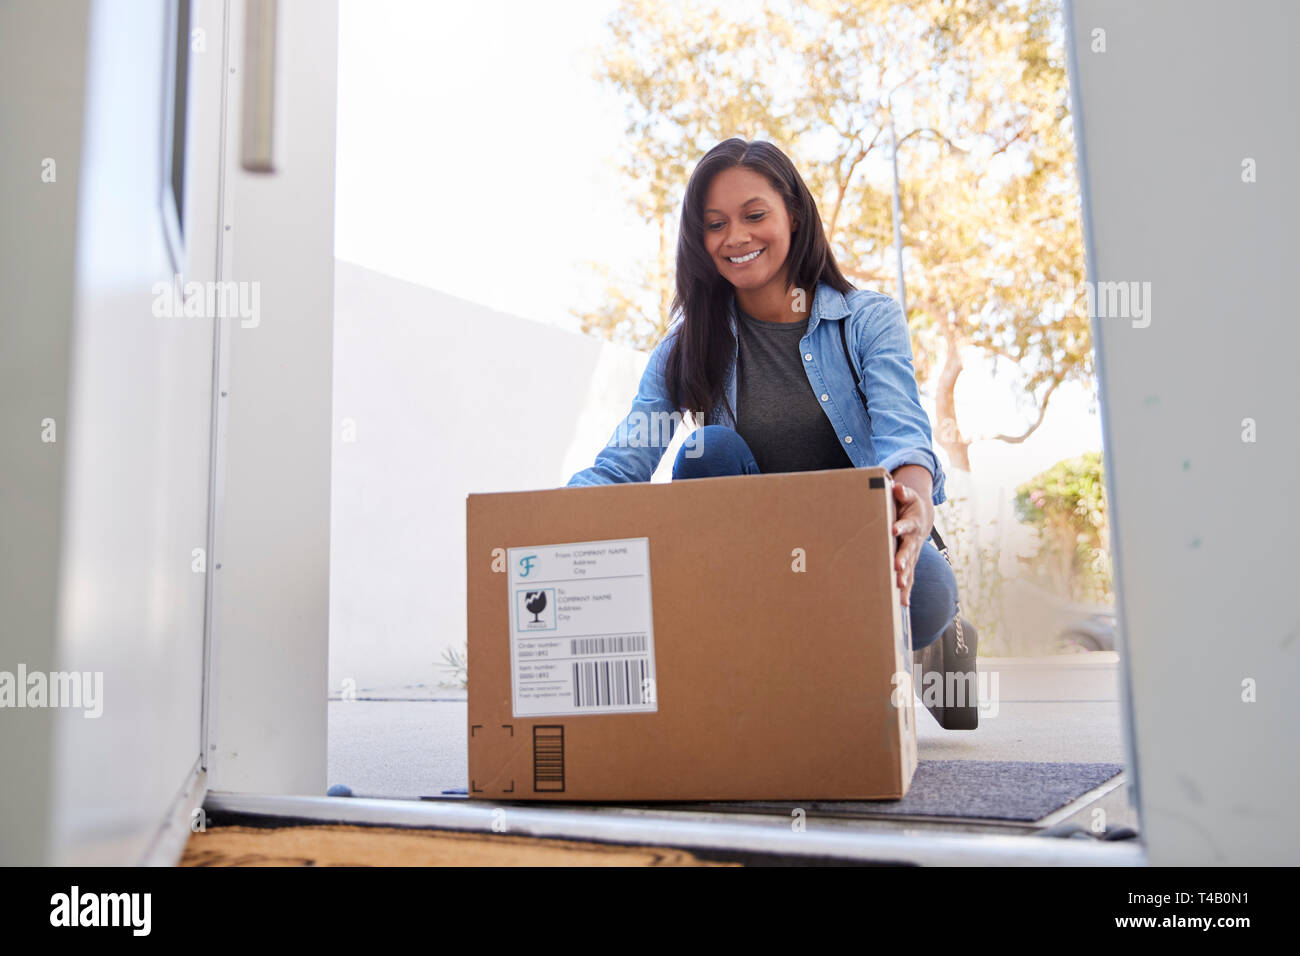 Woman Coming Back To Home Delivery In Cardboard Box Outside Front Door Stock Photo